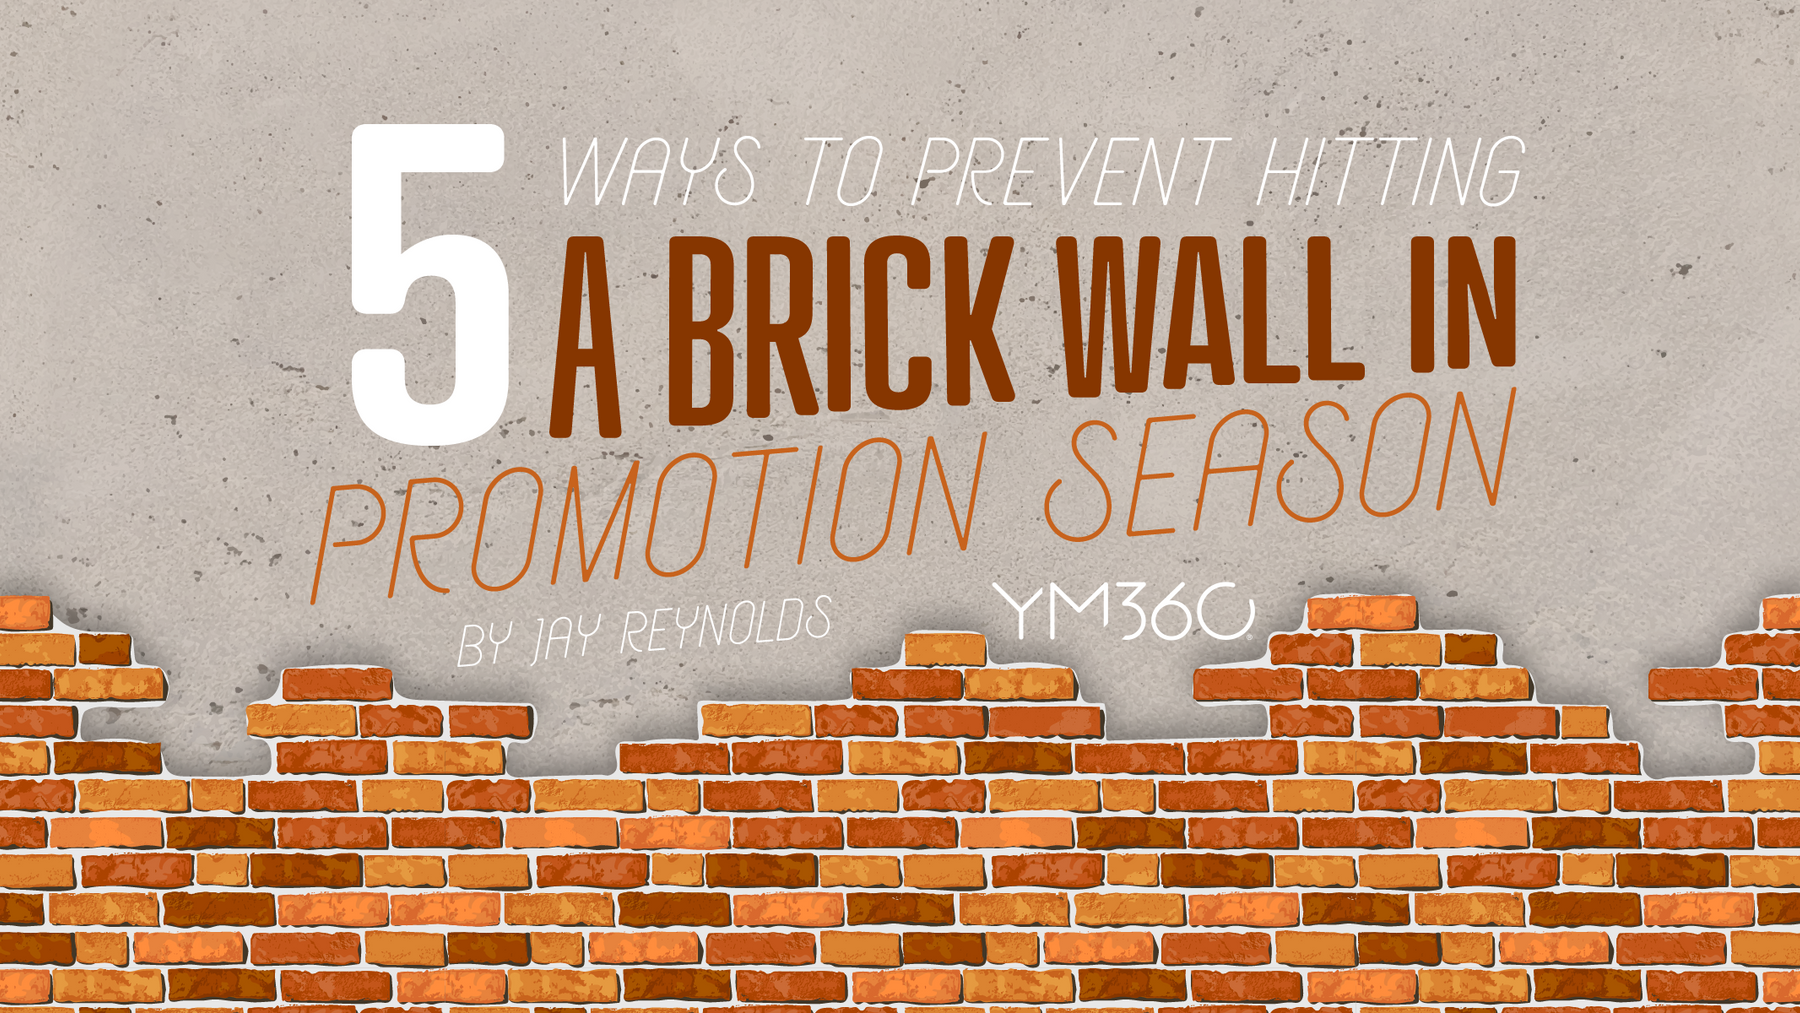 5 Ways to Prevent Hitting a Brick Wall in Promotion Season